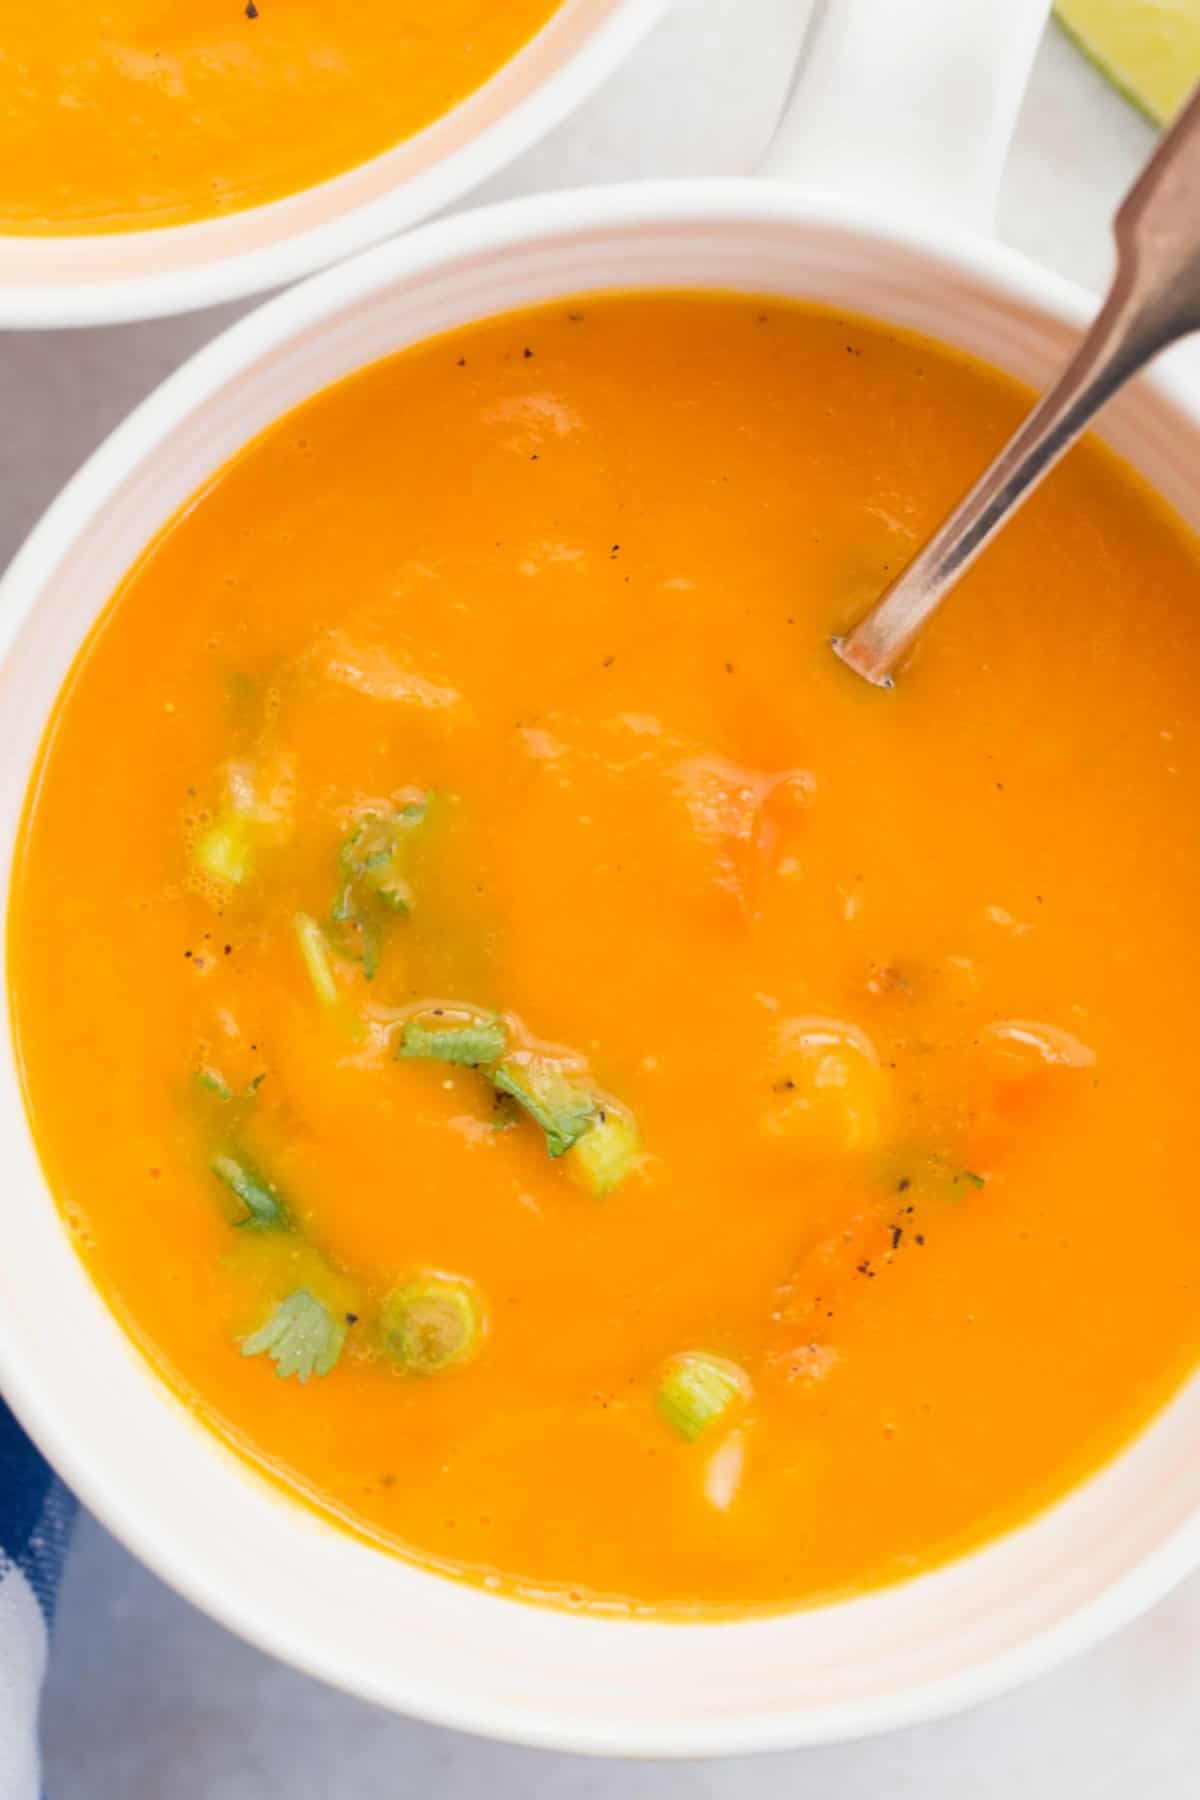 Carrot Ginger Soup Recipe - The Harvest Kitchen